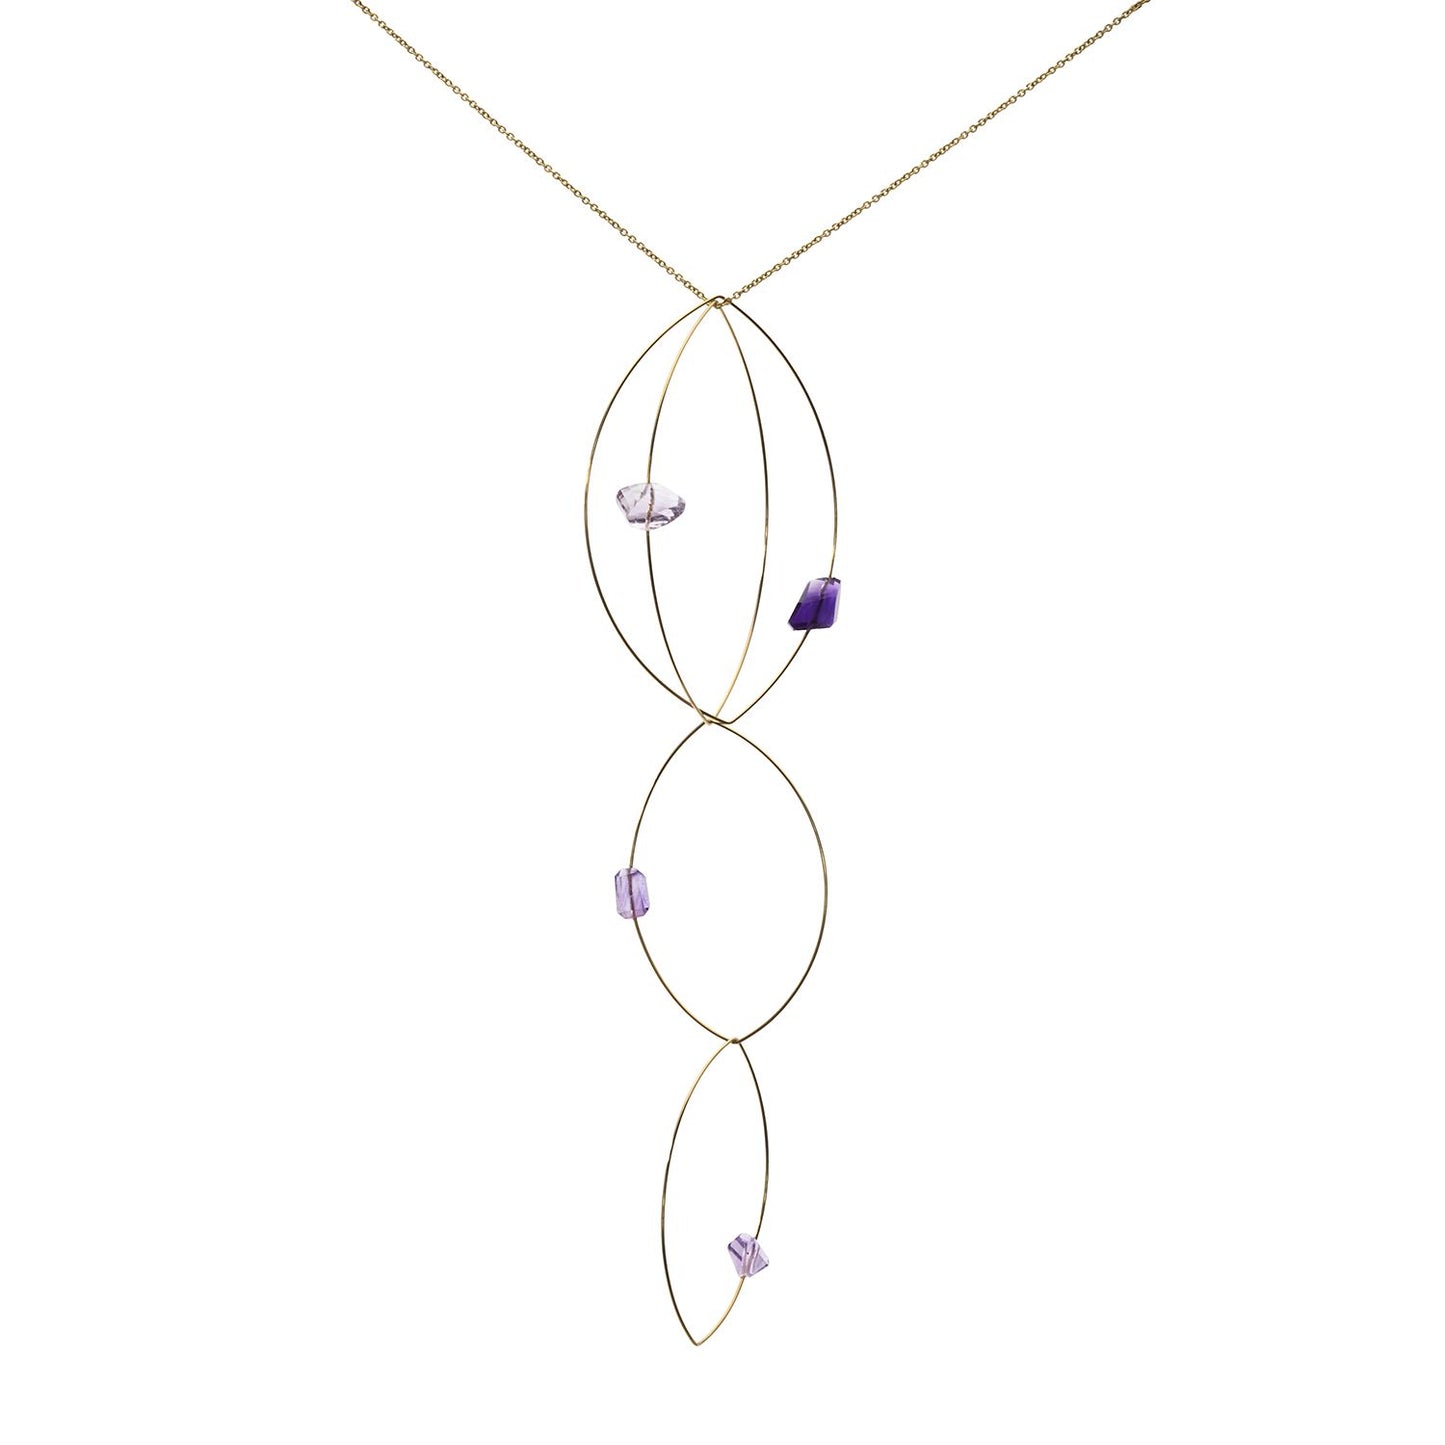 'Morph It!' Necklace with Amethyst